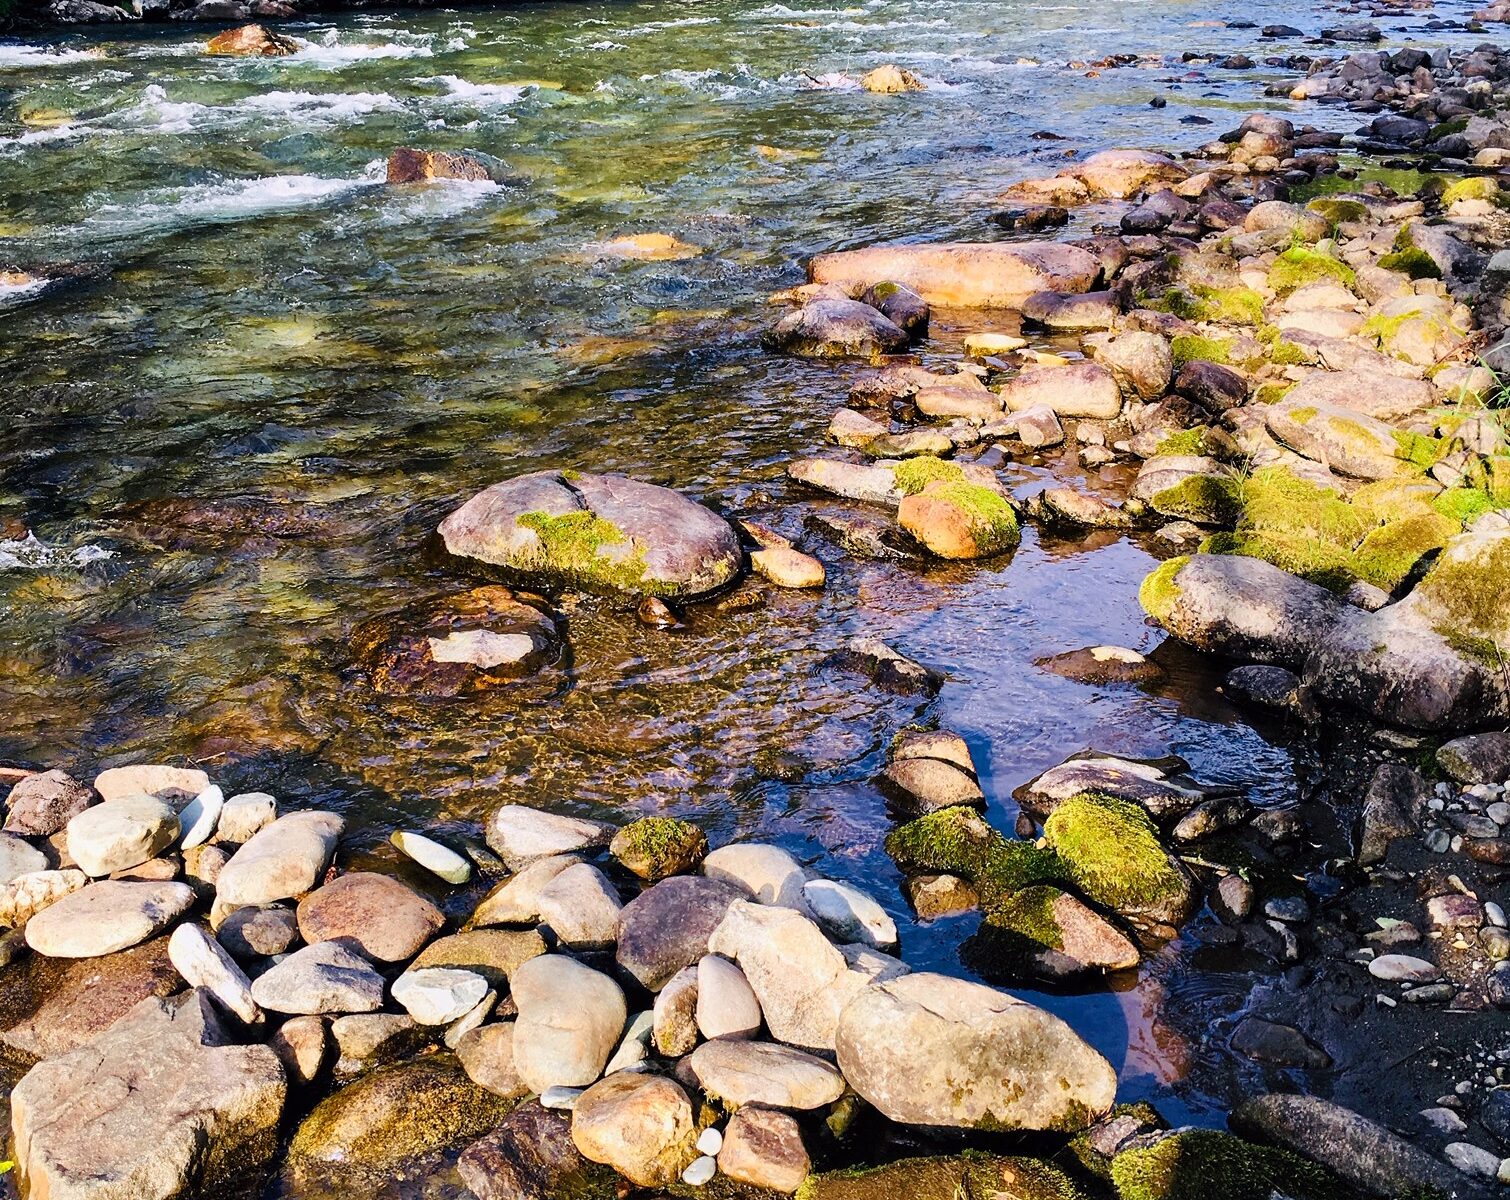 A brook with clear water